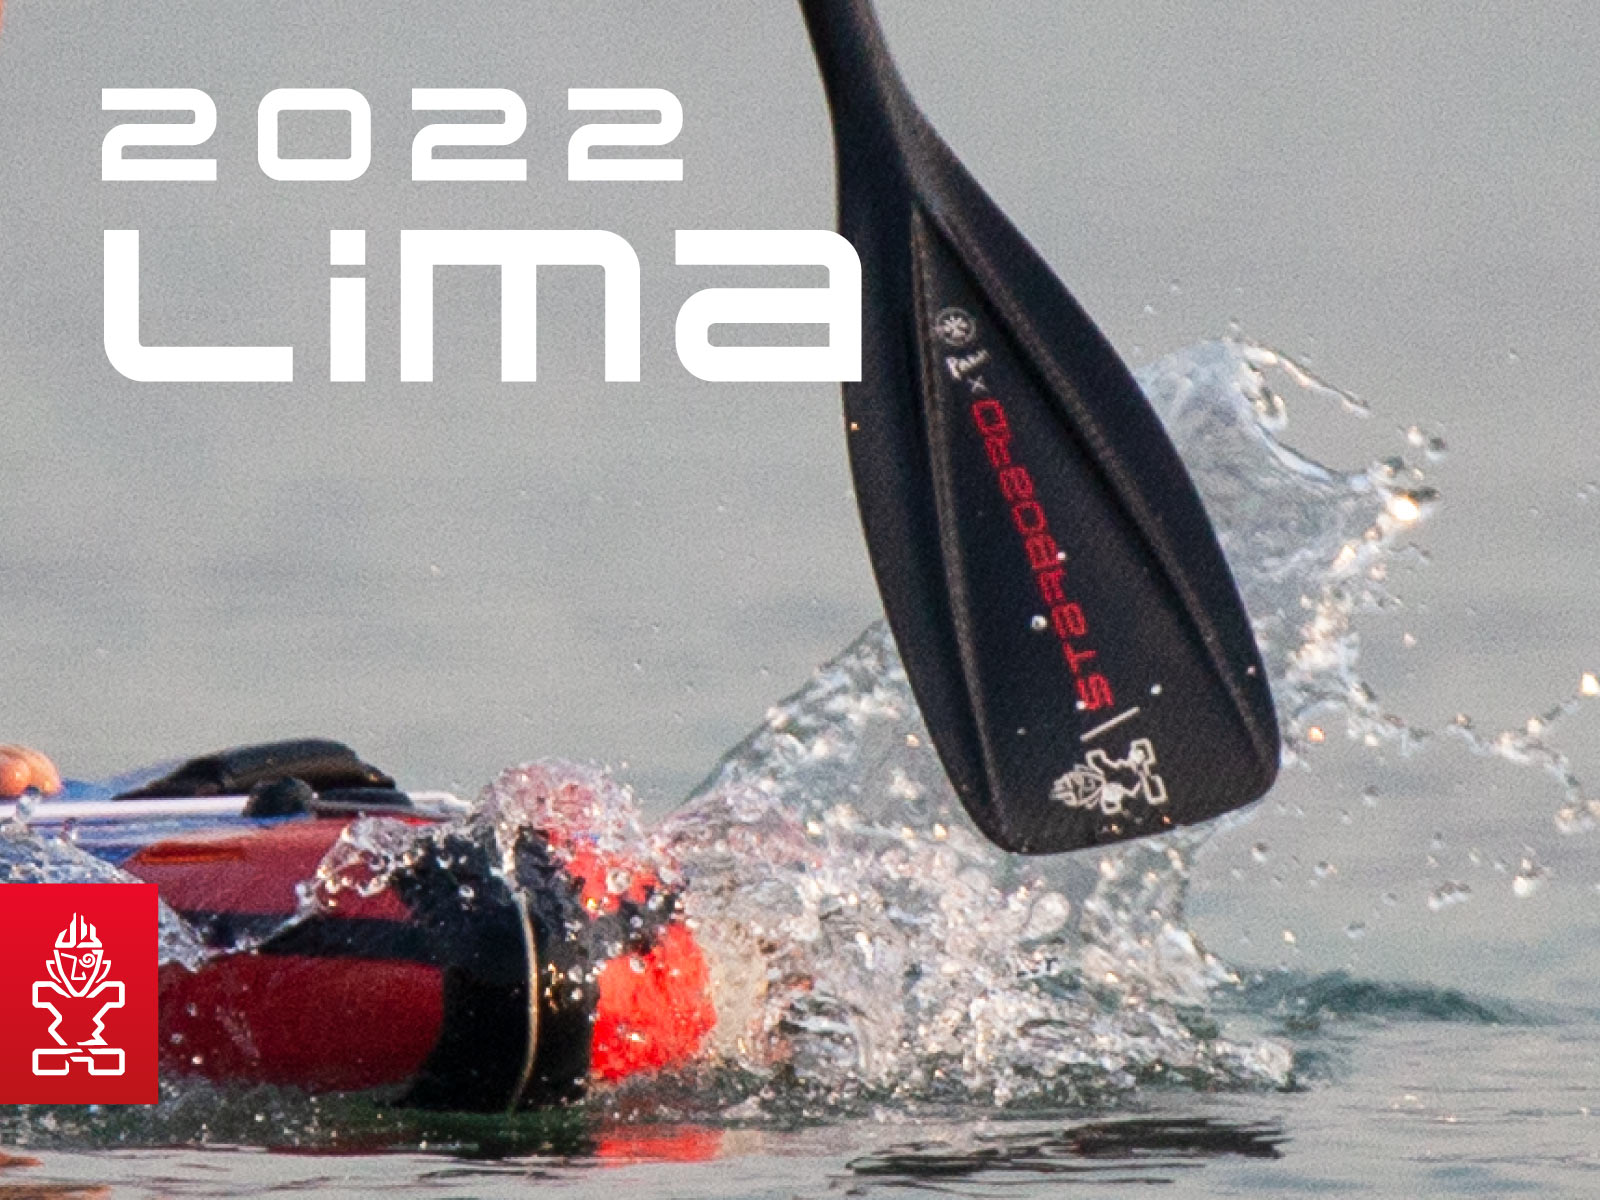 2022 Lima Paddle » High-performance SUP Paddle » Starboard SUP